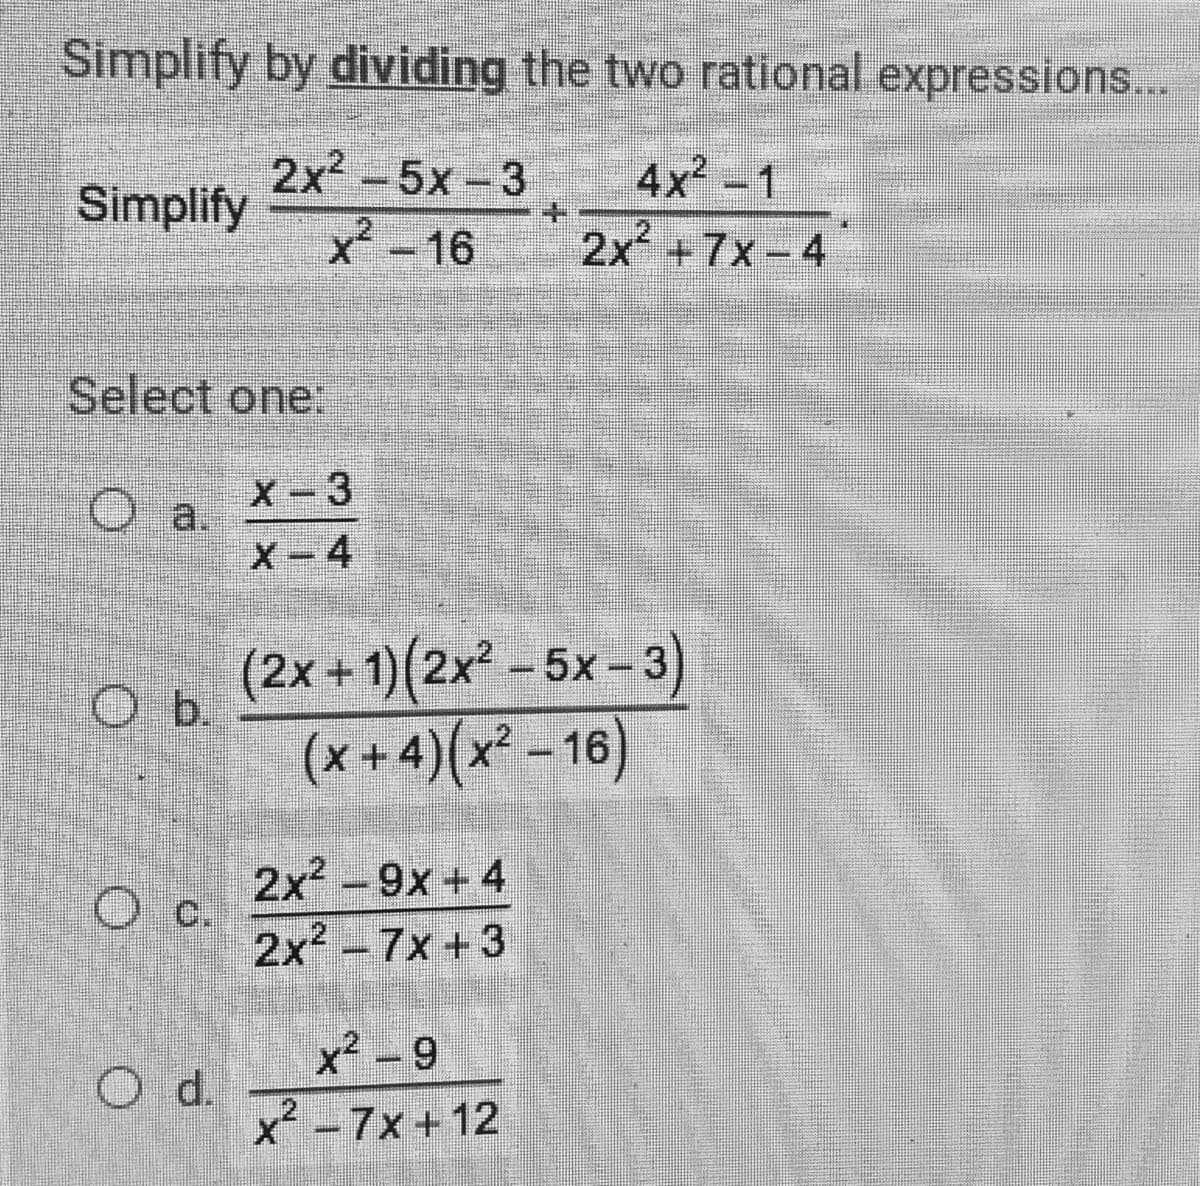 Simplify by dividing the two rational expressions...
2x -5x-3
4x-1
Simplify
X-16
2x +7x-4
Select one
X-3
O a.
X-4
(2x + 1)(2x² - 5x – 3)
O b.
(x+ 4)(x² – 16)
2x -9x + 4
O c.
2x2 -7x +3
x² - 9
Od.
.2
x-7x+12
